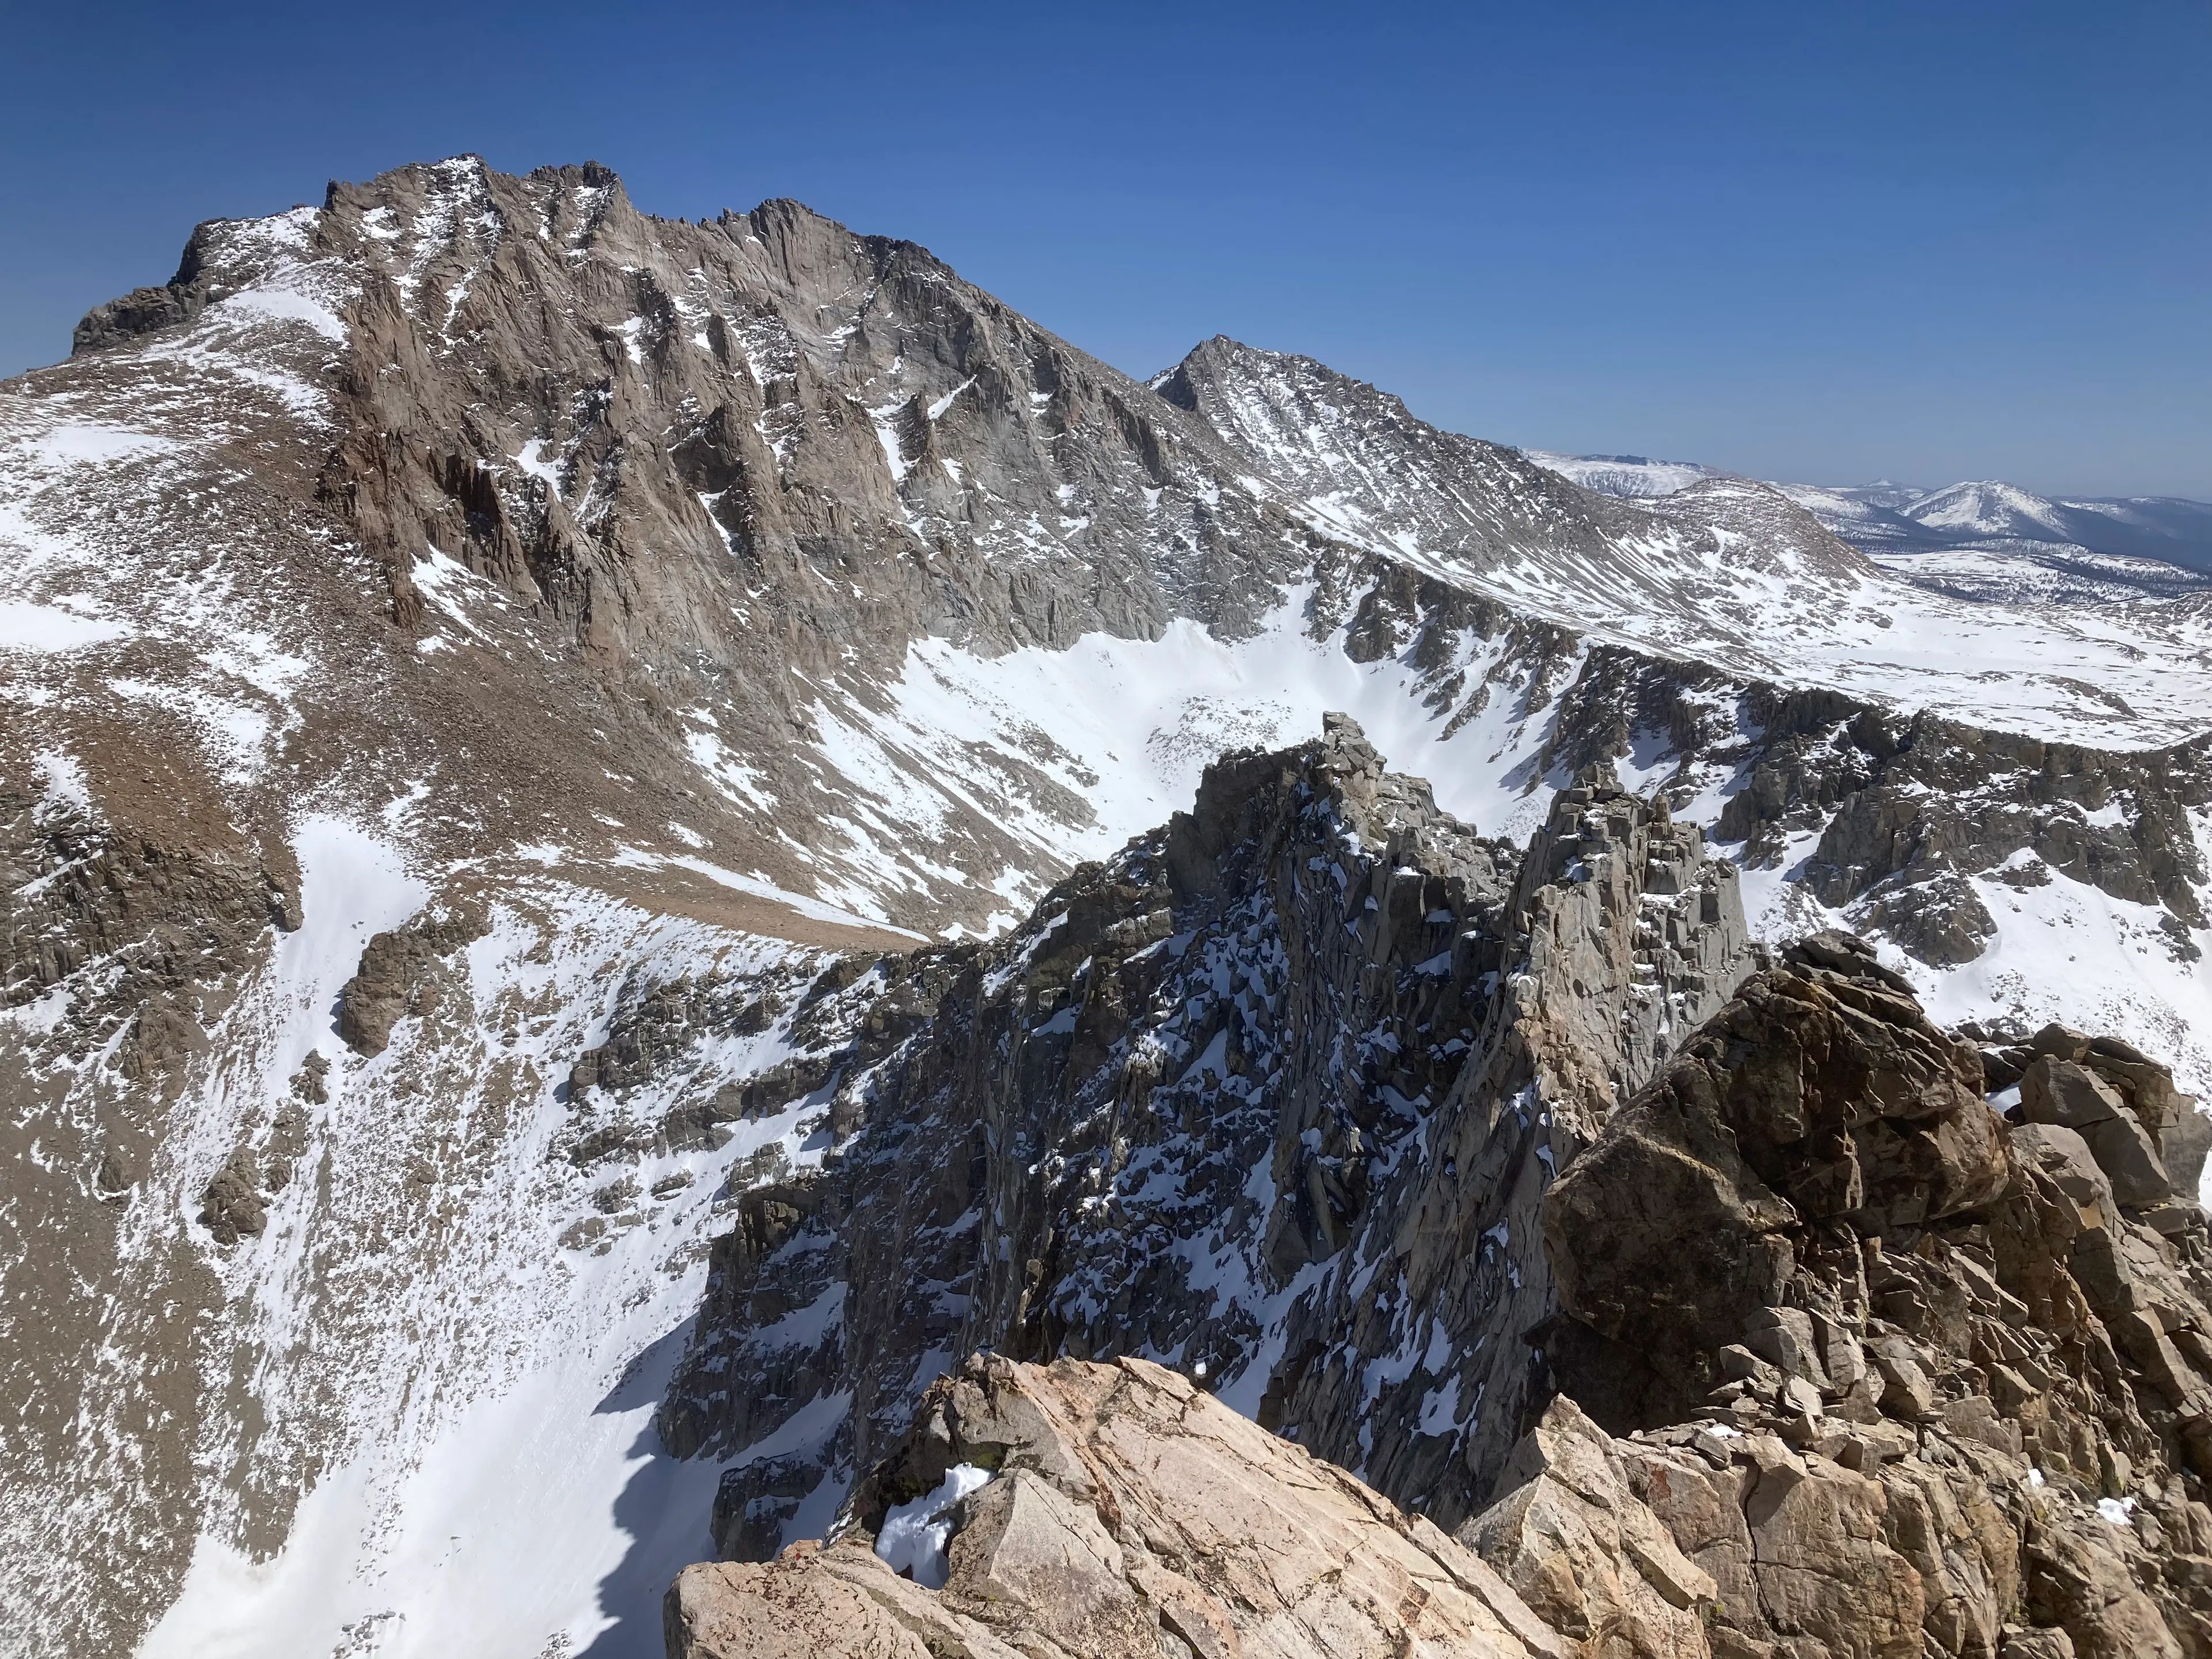 Mount Stanford (L) and Caltech Peak (R)